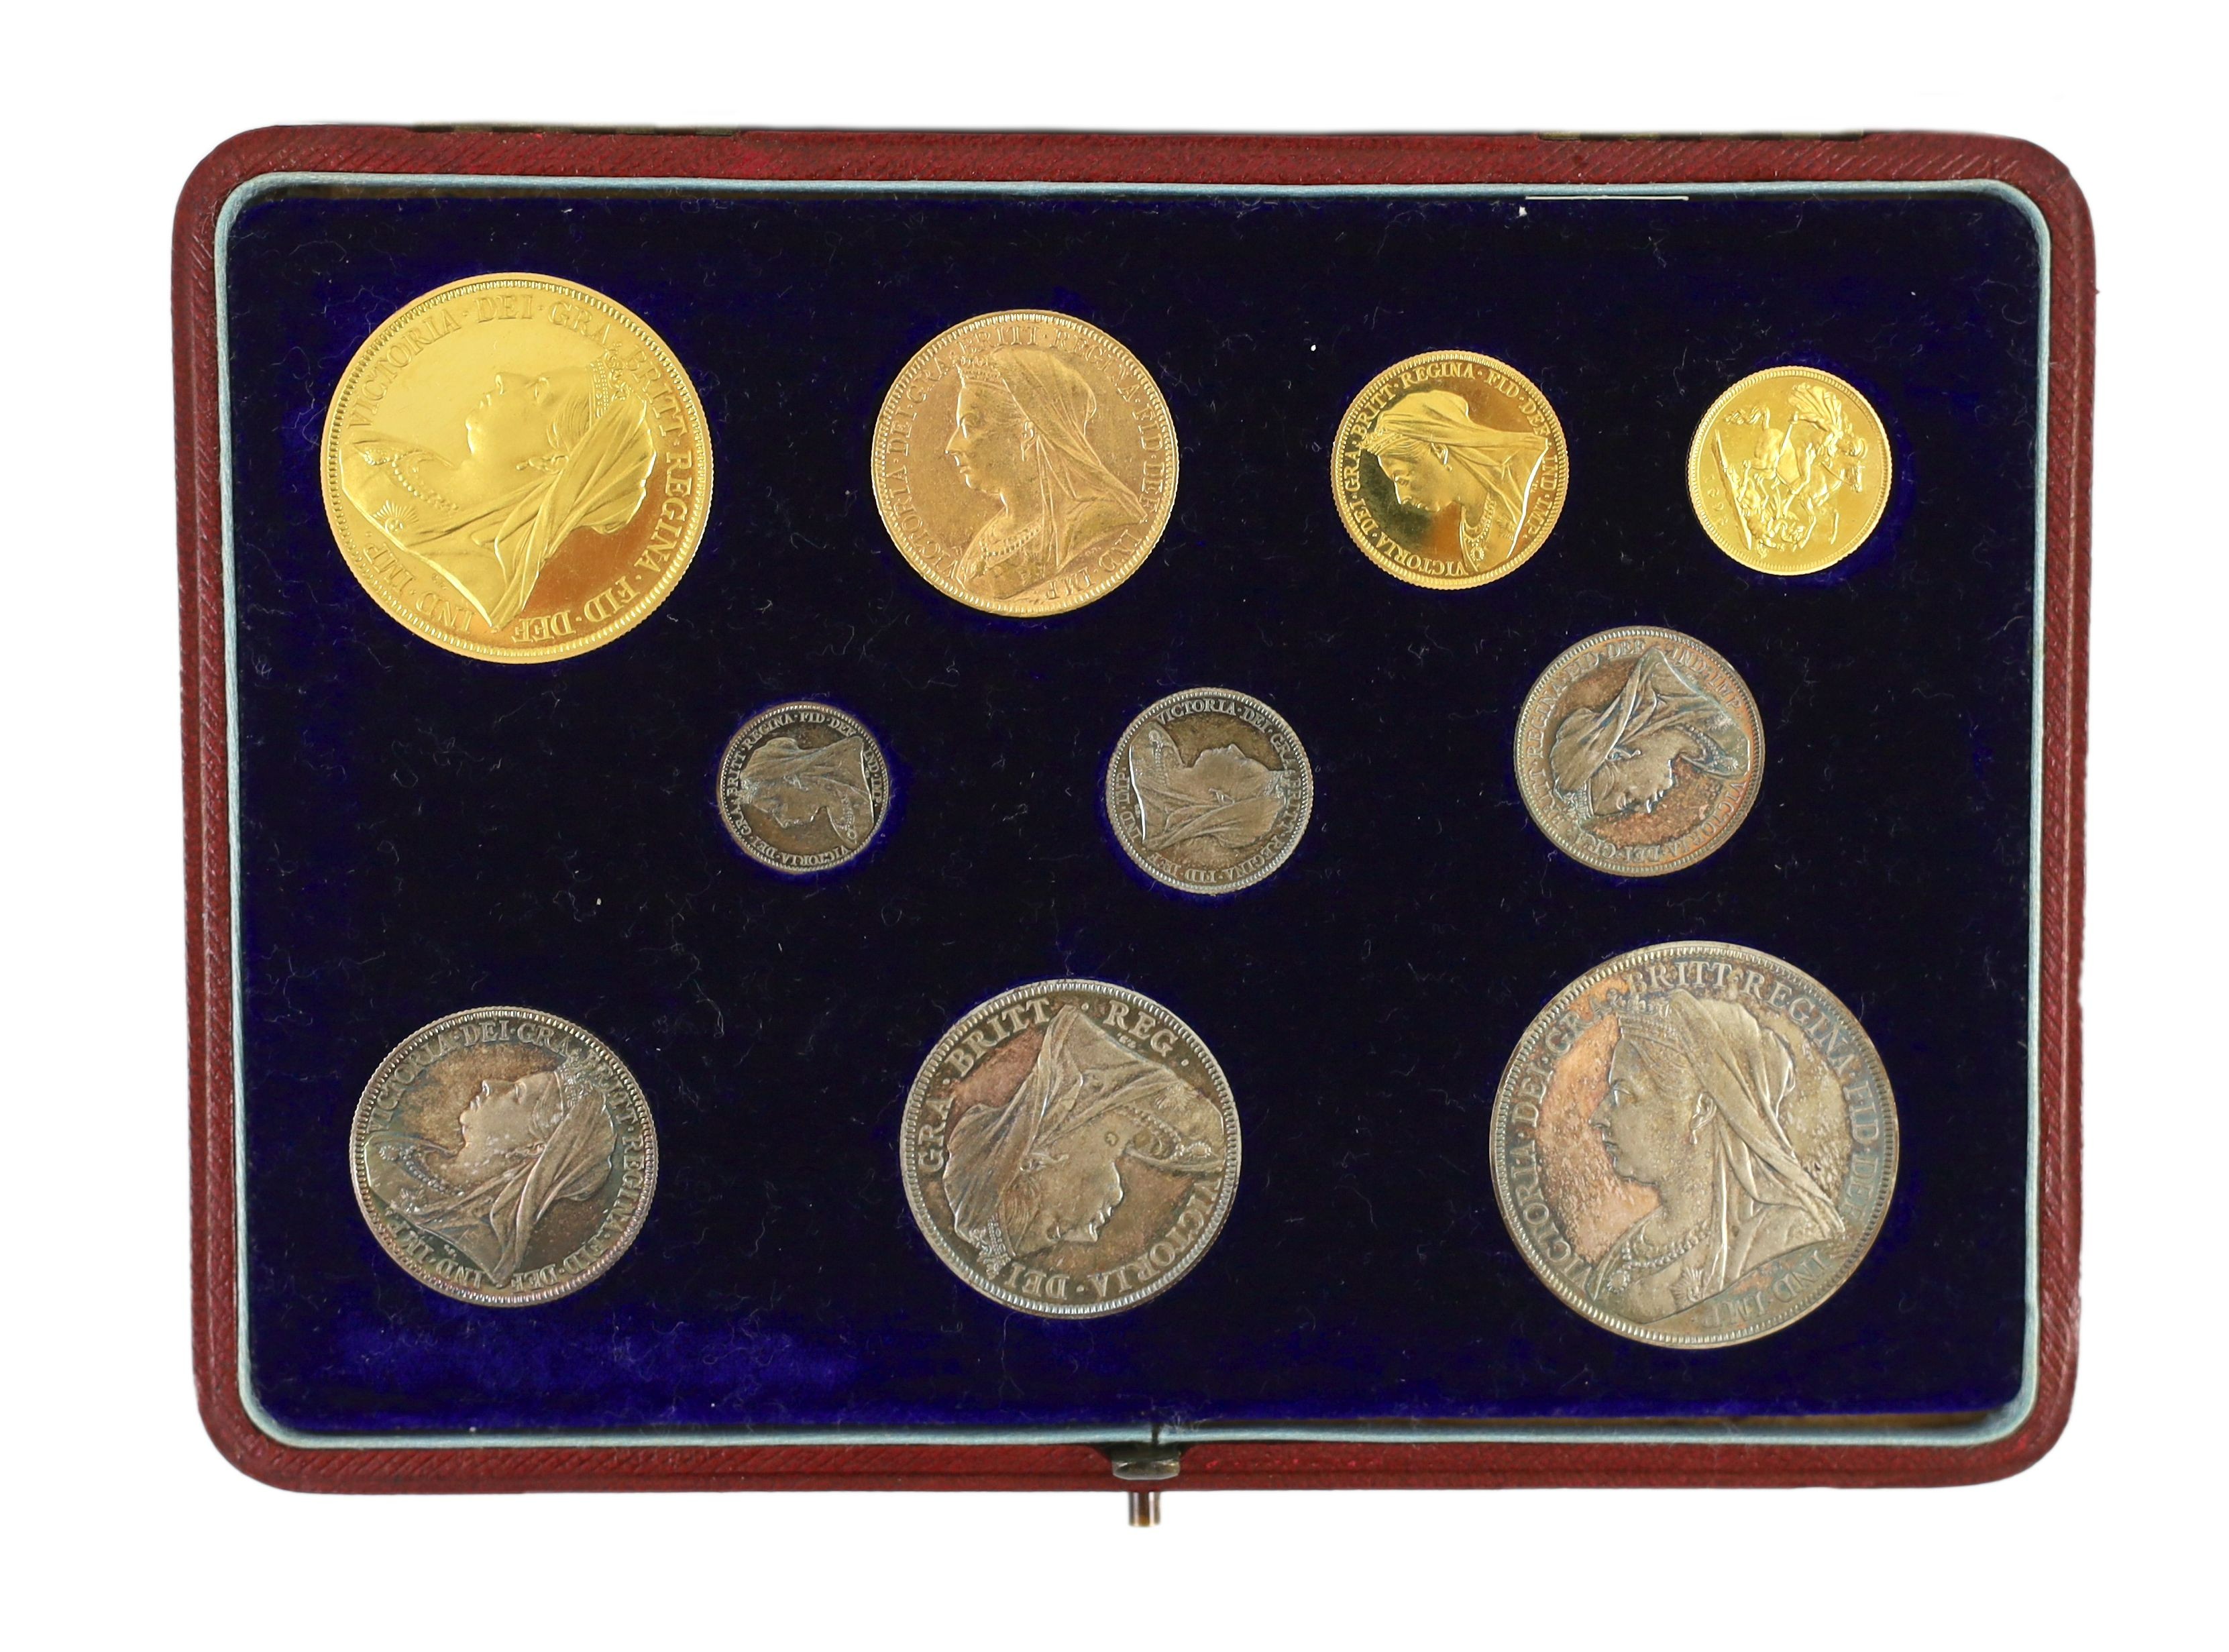 UK coins, a cased Victoria 1893 gold and silver proof coin set